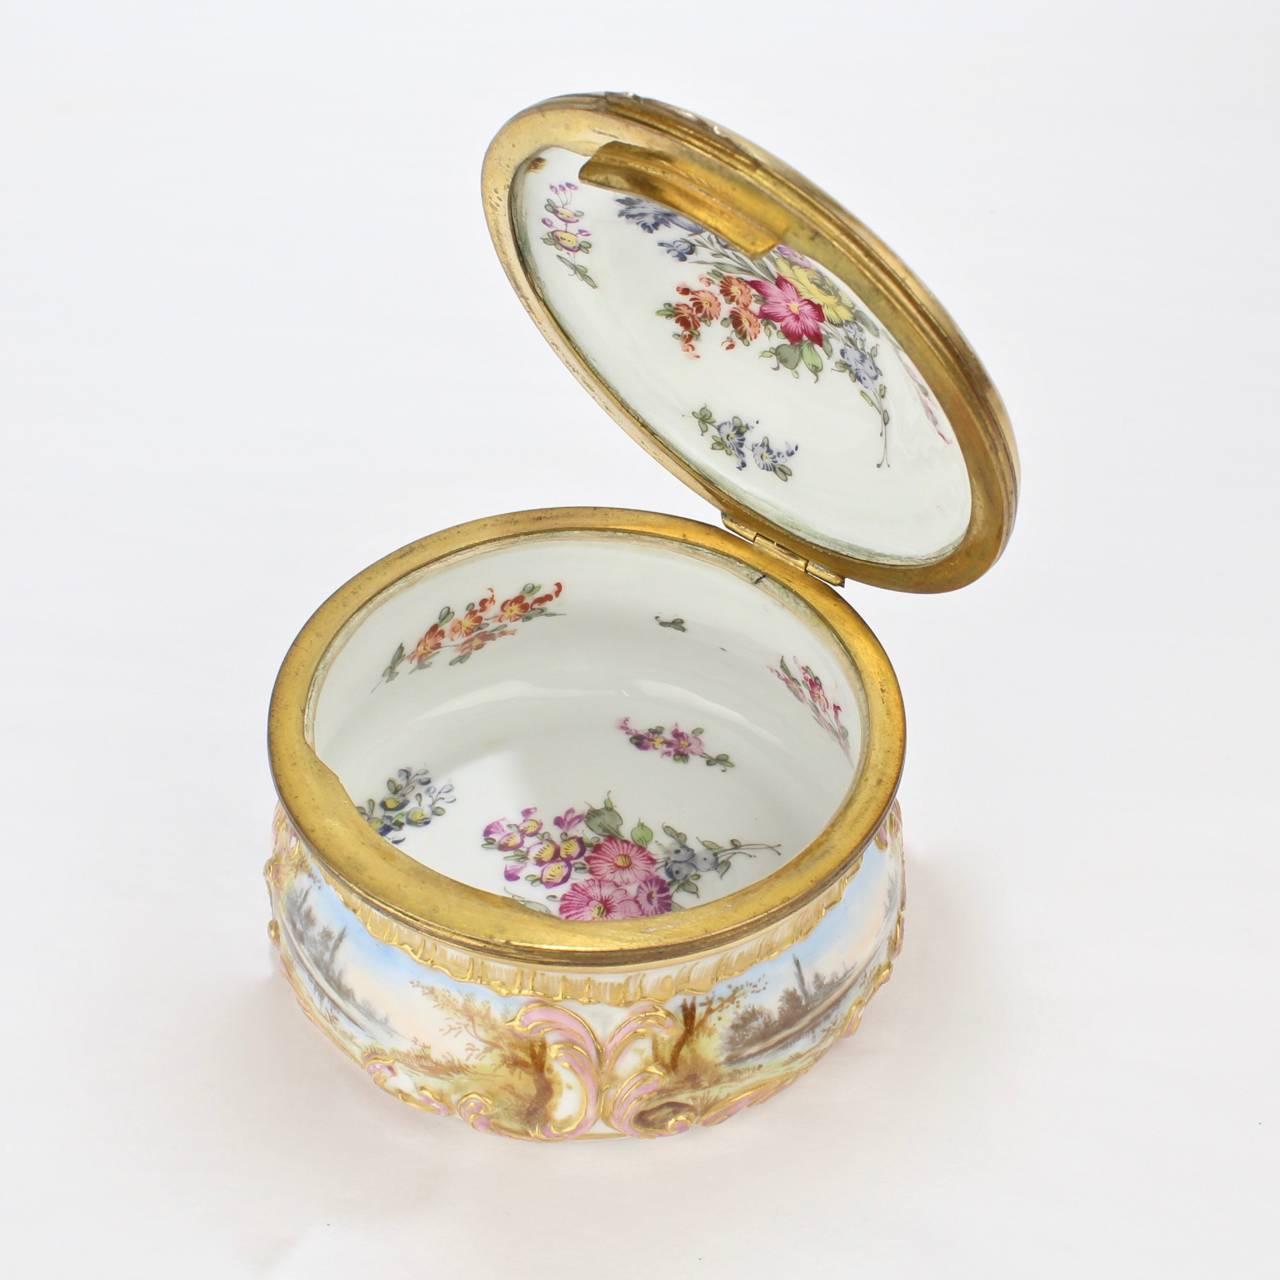 Antique Gilt Paris Porcelain Table Snuff Box or Round Casket by Bloch & Bourdois In Good Condition For Sale In Philadelphia, PA